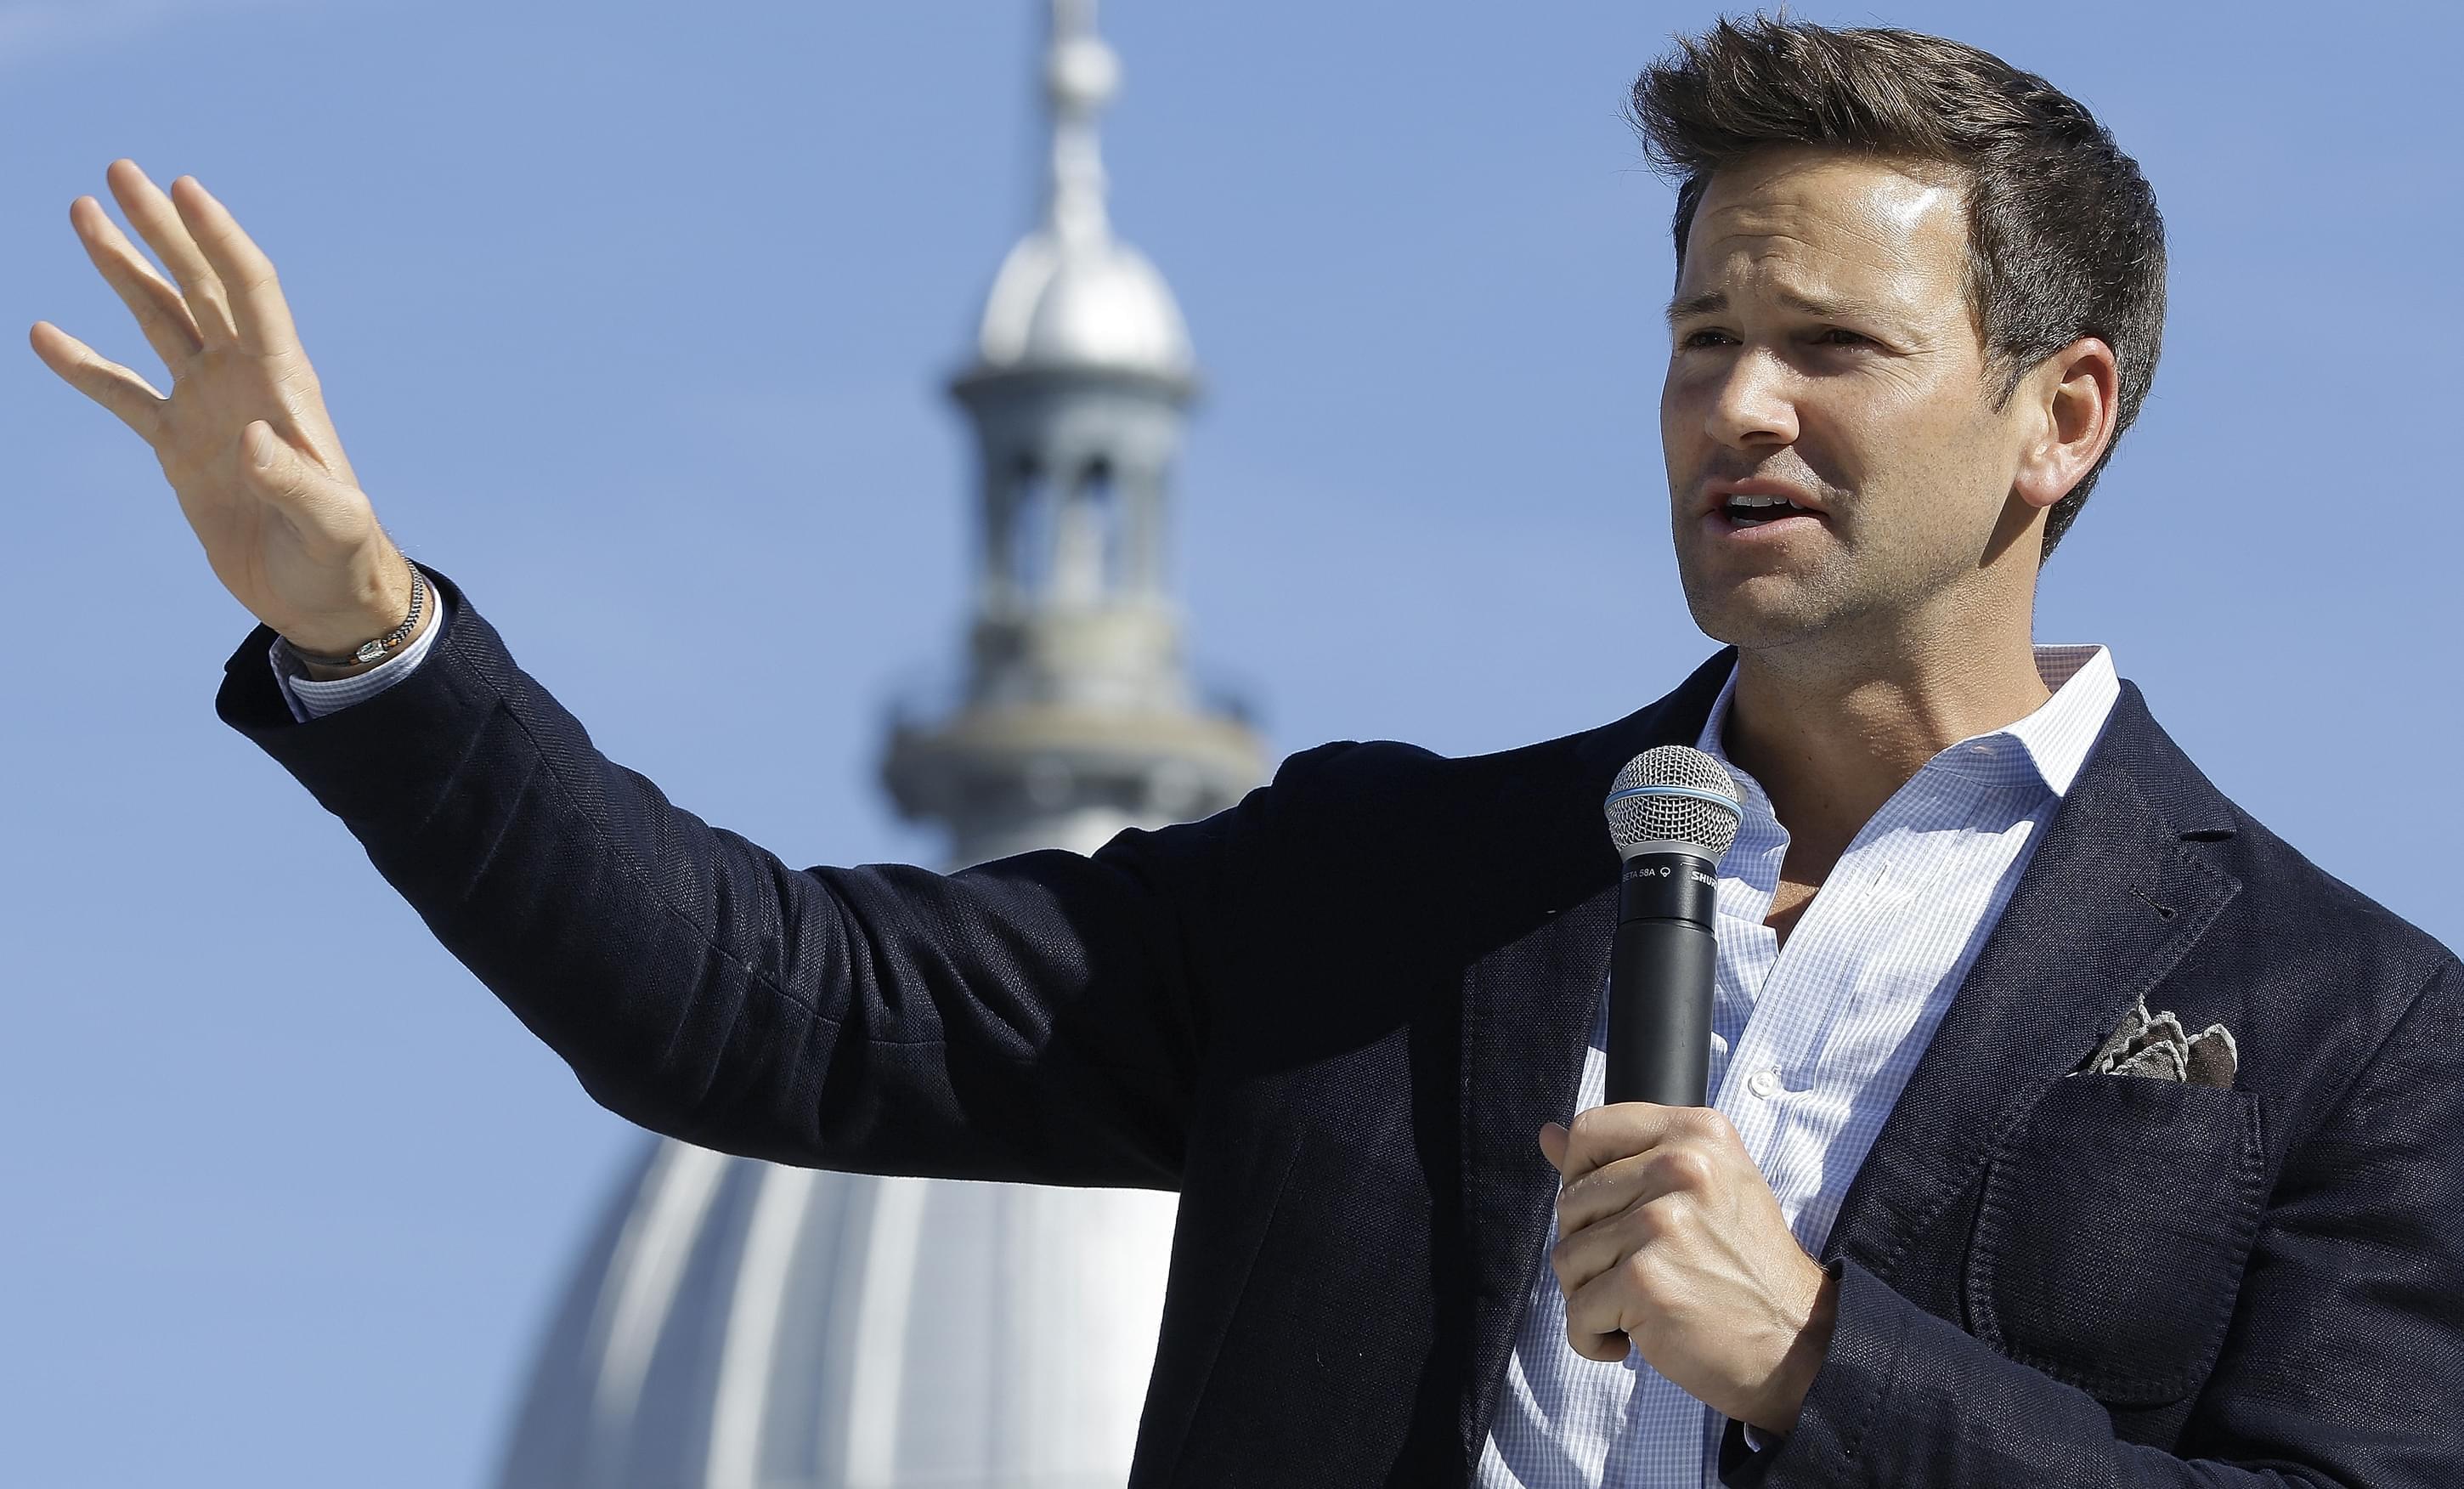 Former Congressman Aaron Schock, R-Ill., speaks in support of Bruce Rauner during a gubernatorial campaign rally outside the State Capitol in Springfield, Ill., Monday, Nov. 3, 2014.